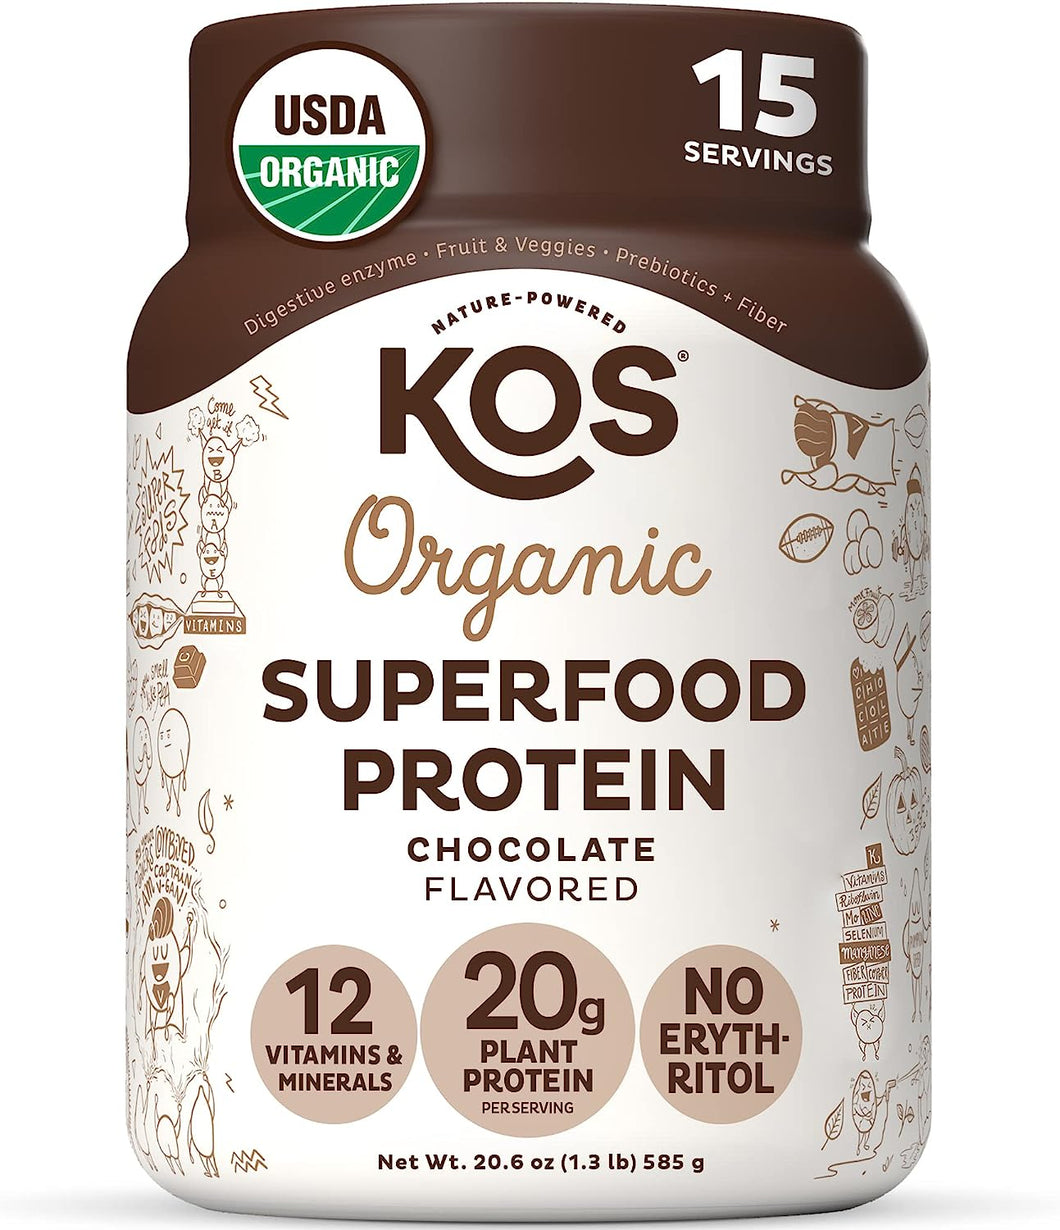 Plant Based Protein Powder, Chocolate USDA Organic - Low Carb Pea Protein Blend, Vegan Superfood with Vitamins & Minerals - Keto, Soy, Dairy Free - Meal Replacement for Women & Men - 15 Servings